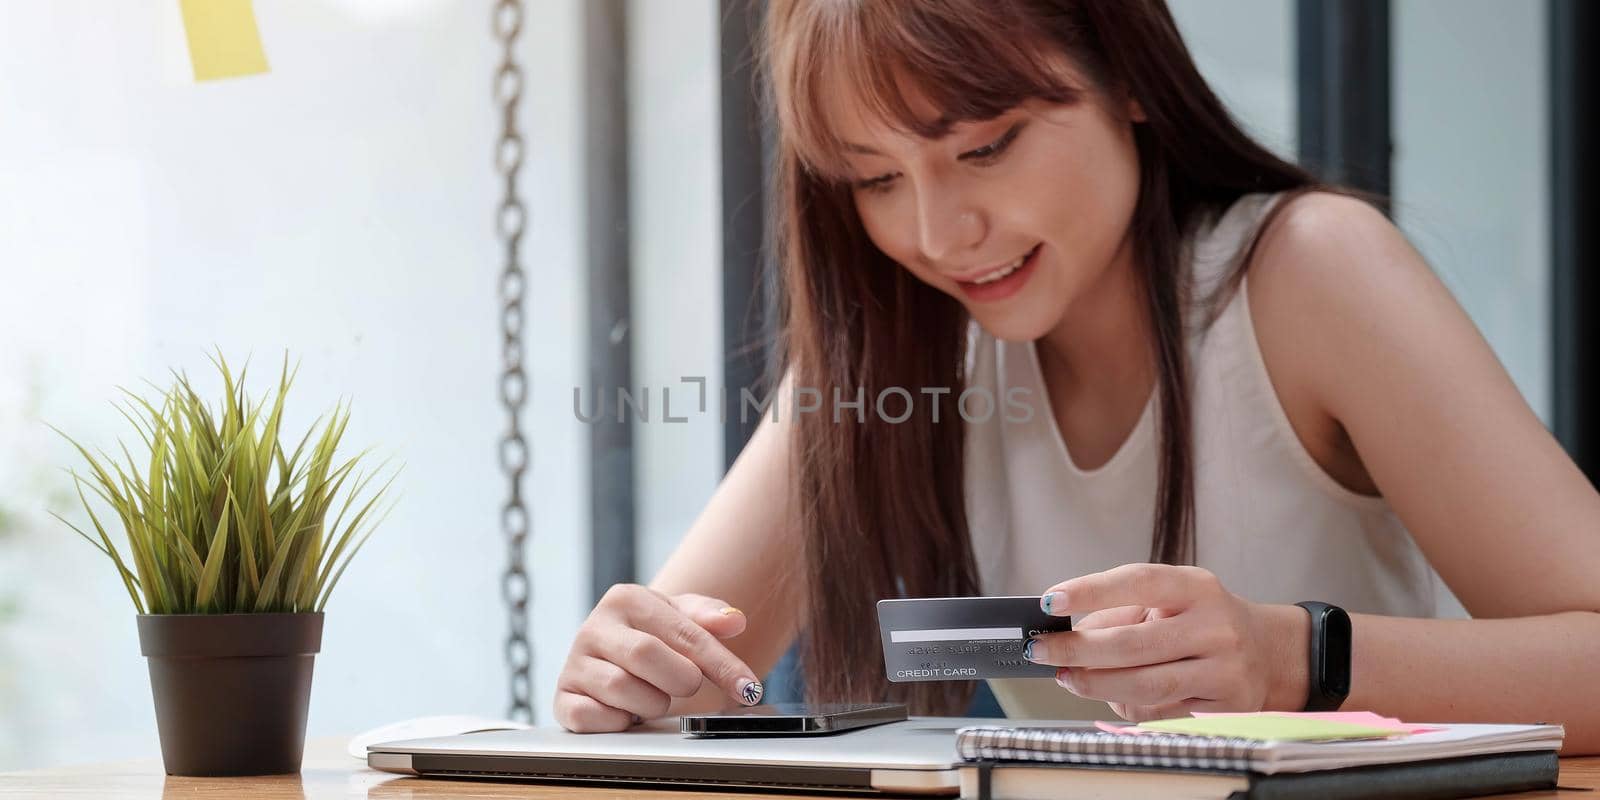 Smiling woman use mobile phone for shopping online with credit card.